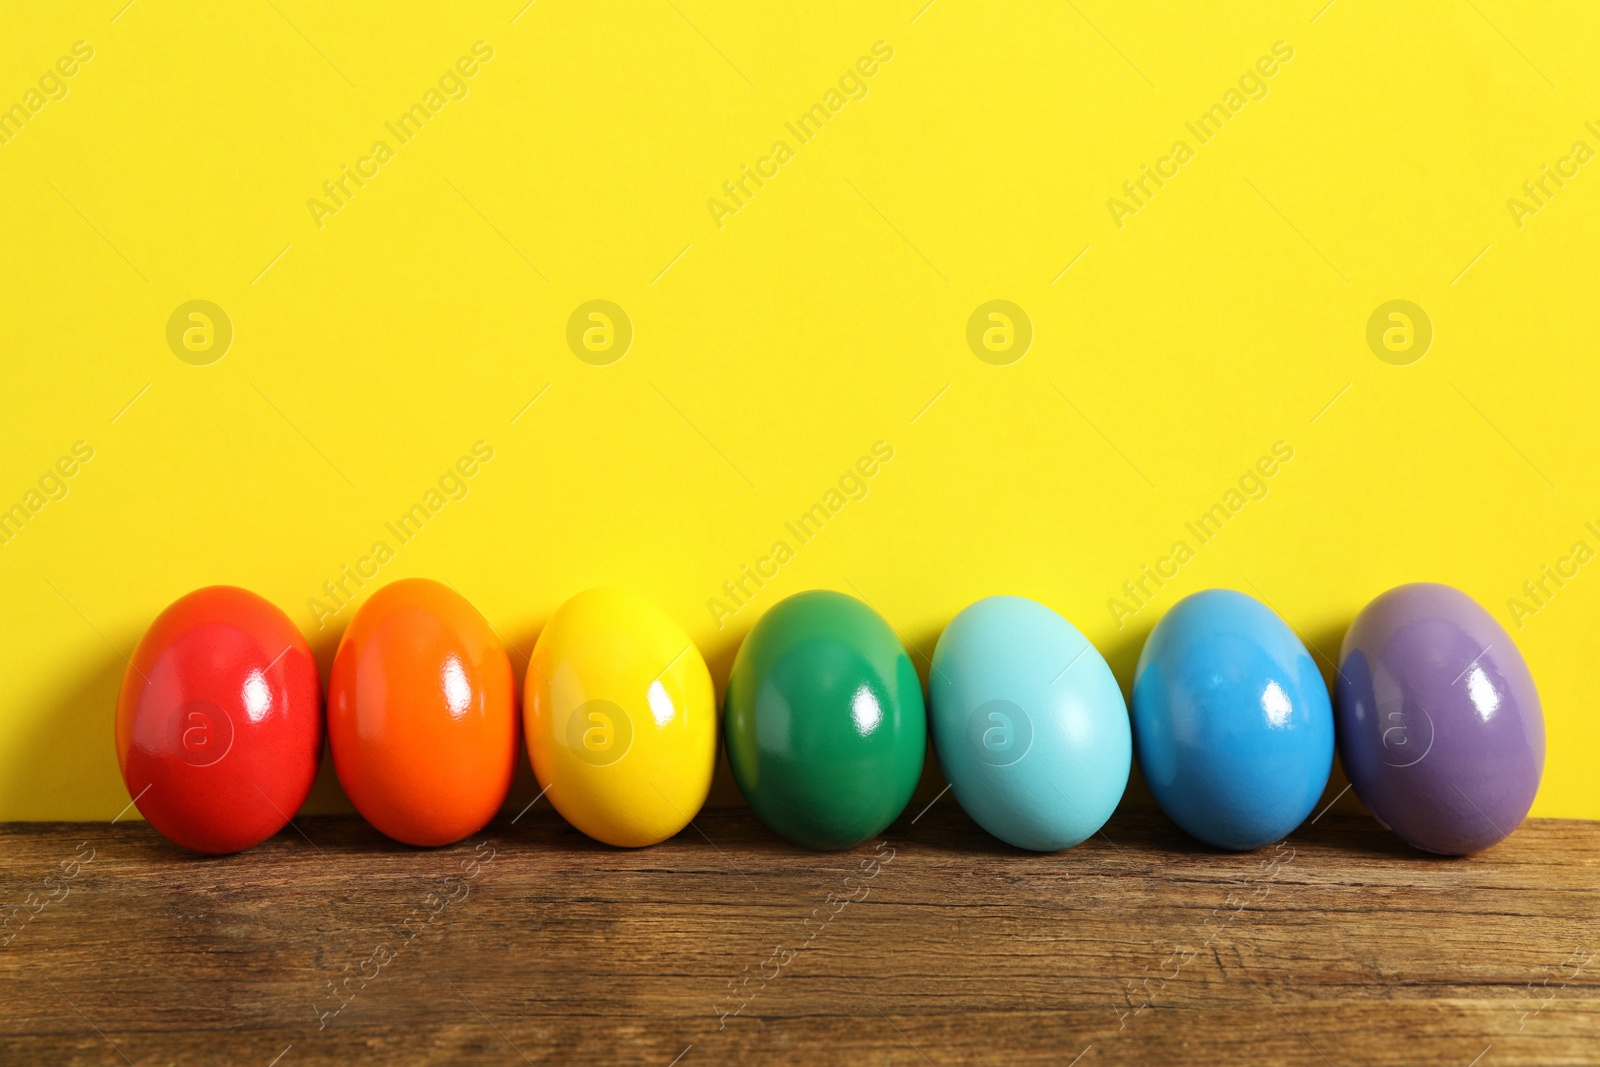 Photo of Easter eggs on wooden table against yellow background, space for text